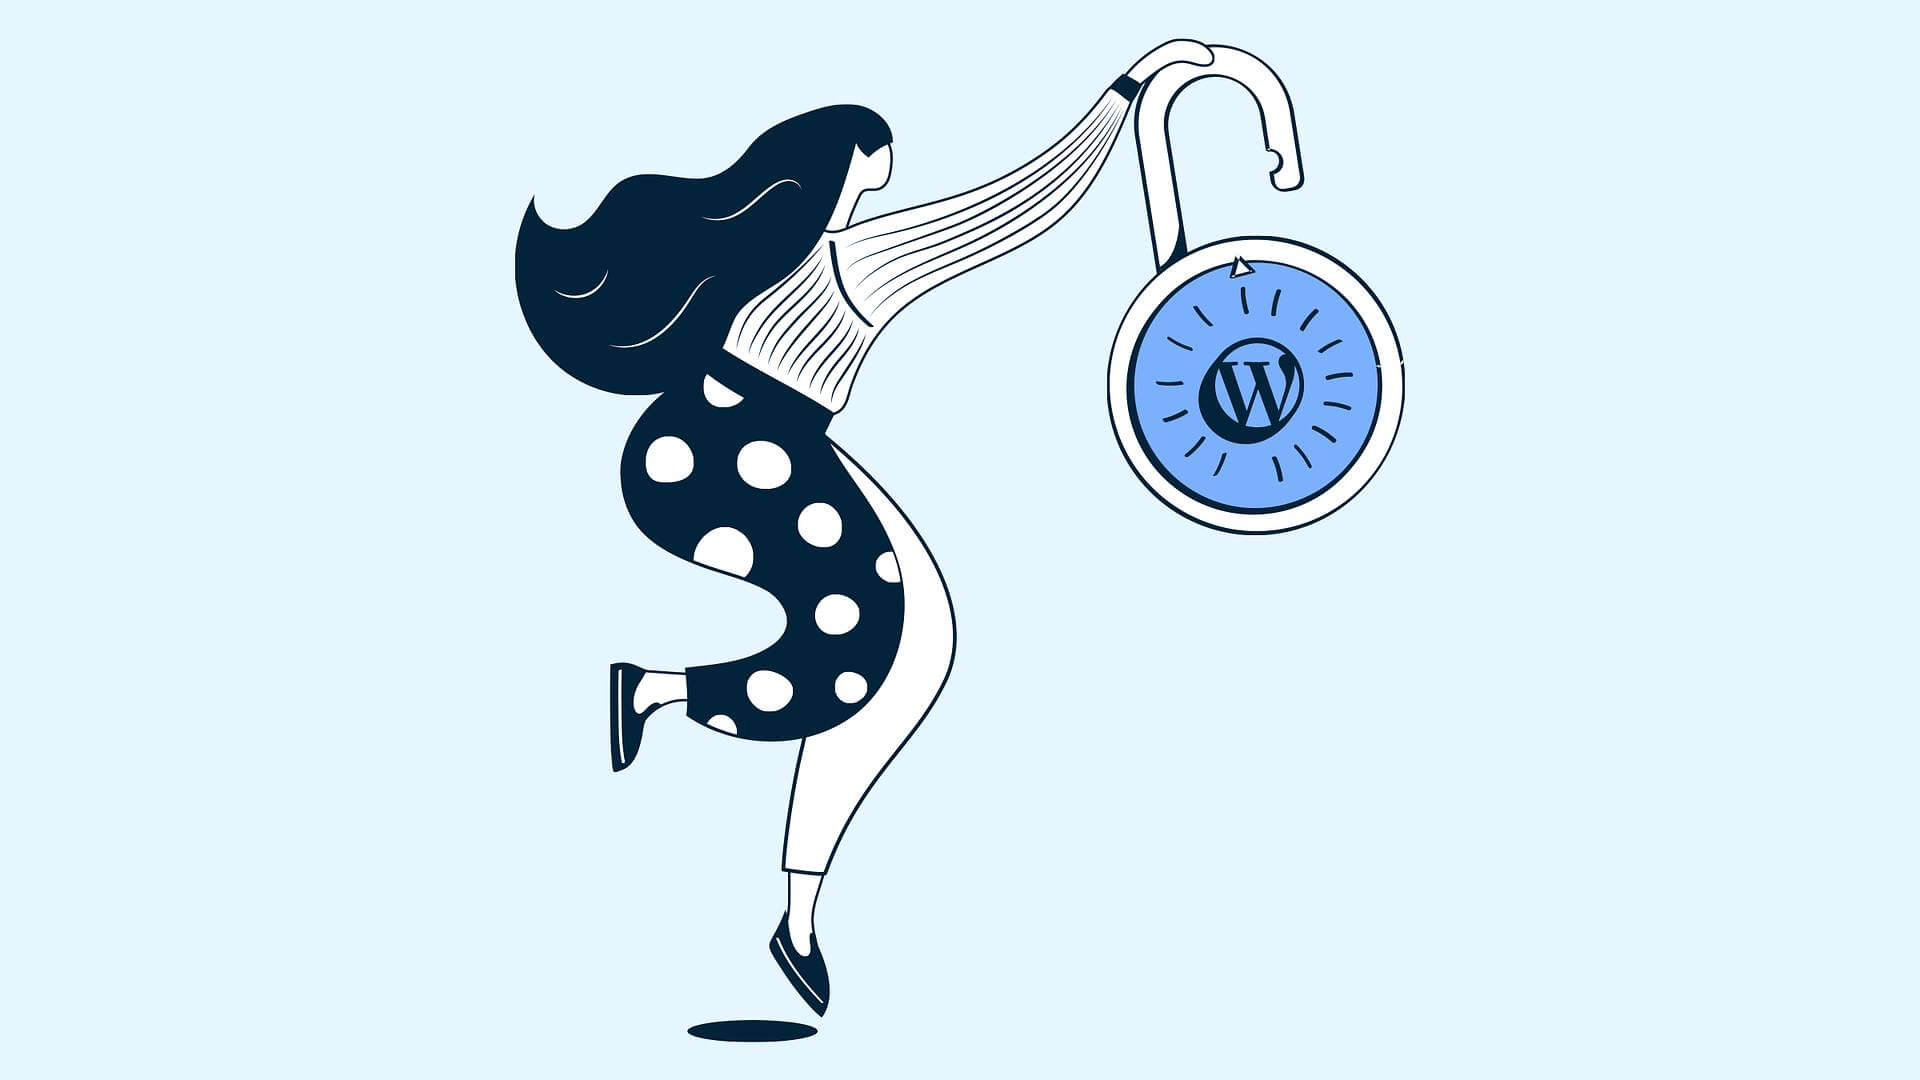 WordPress security guide for beginners